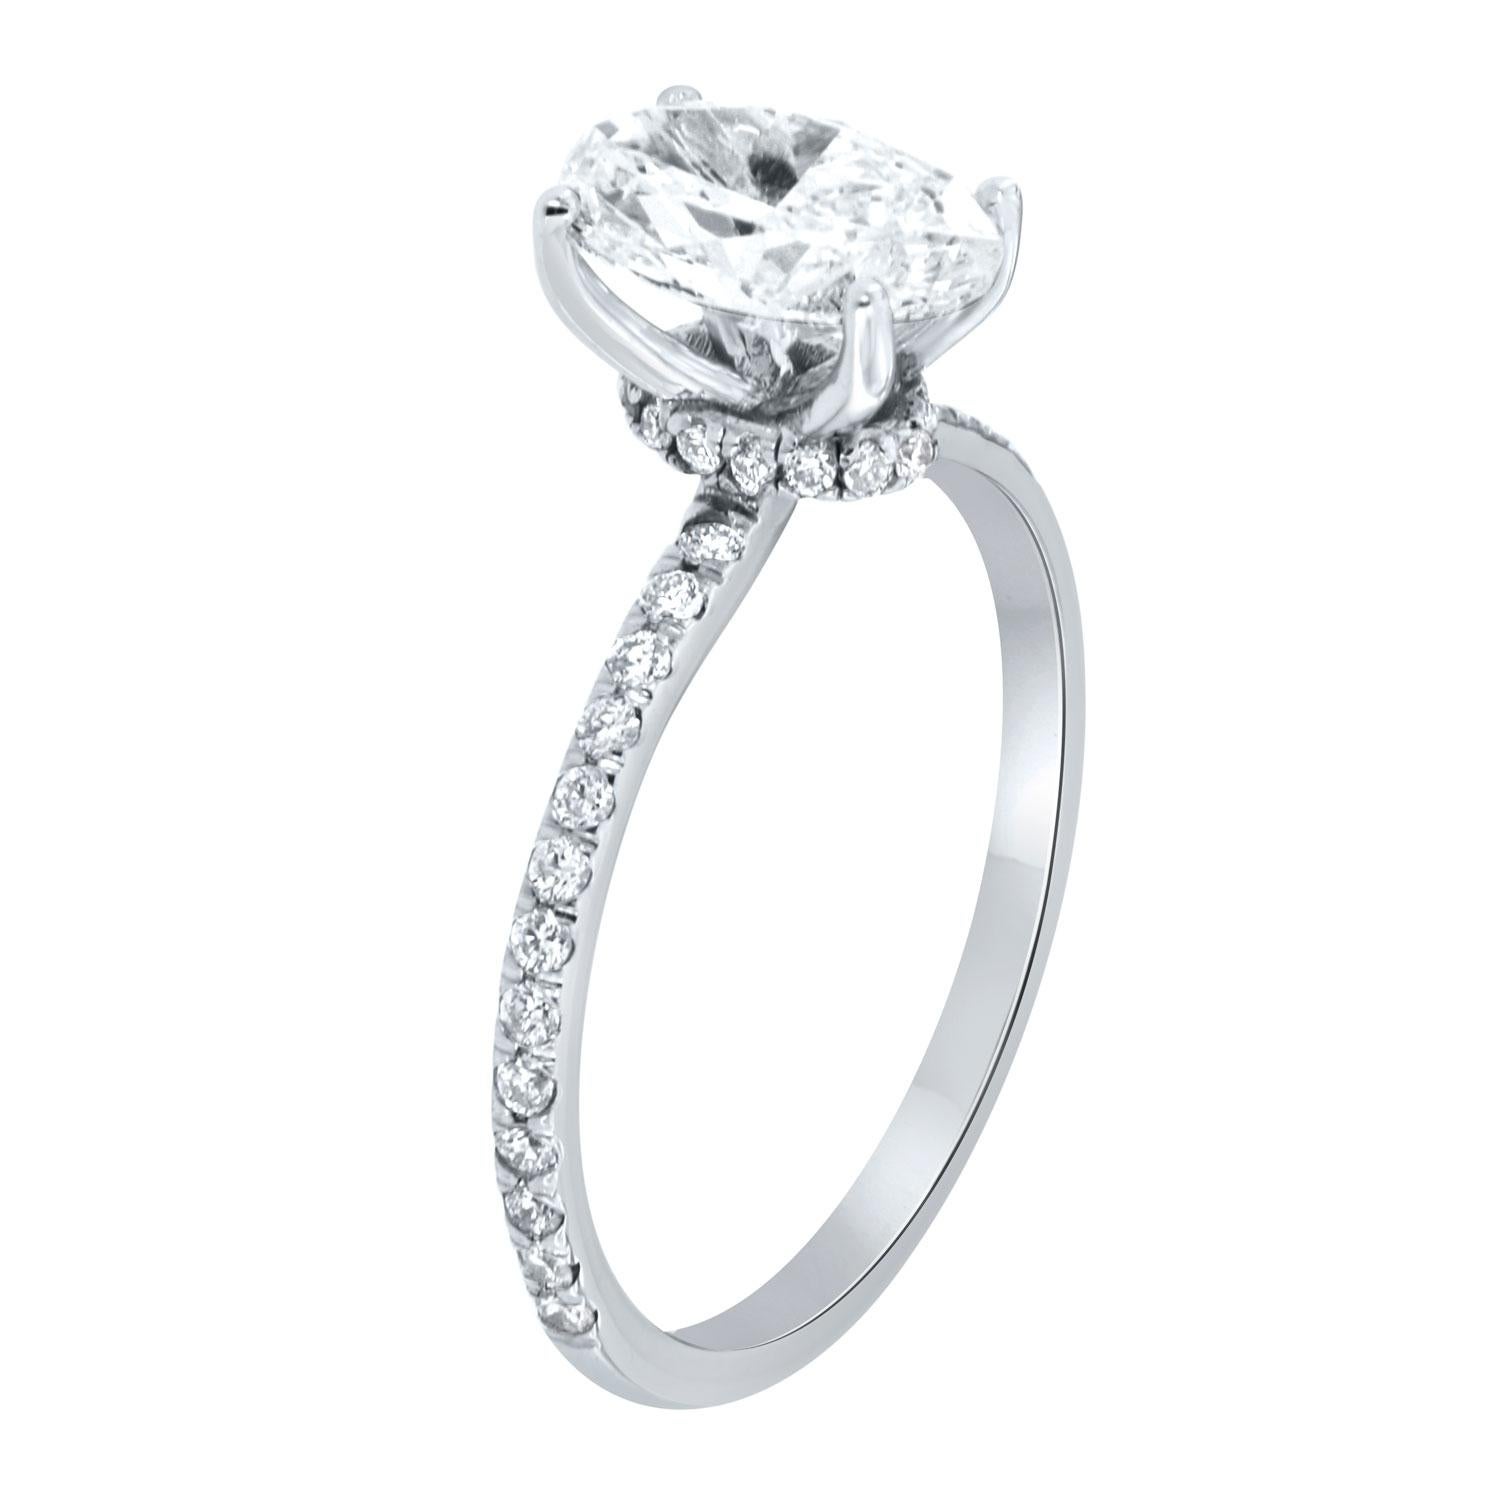 This stunning engagement ring features a 1.20 Carat Oval shape diaomnd GIA certificate 6381721732. This perfectly shaped Oval is G in color and VVS1 in clarity. A row of brilliant round diamonds encircles a hidden halo underneath delicate prongs.